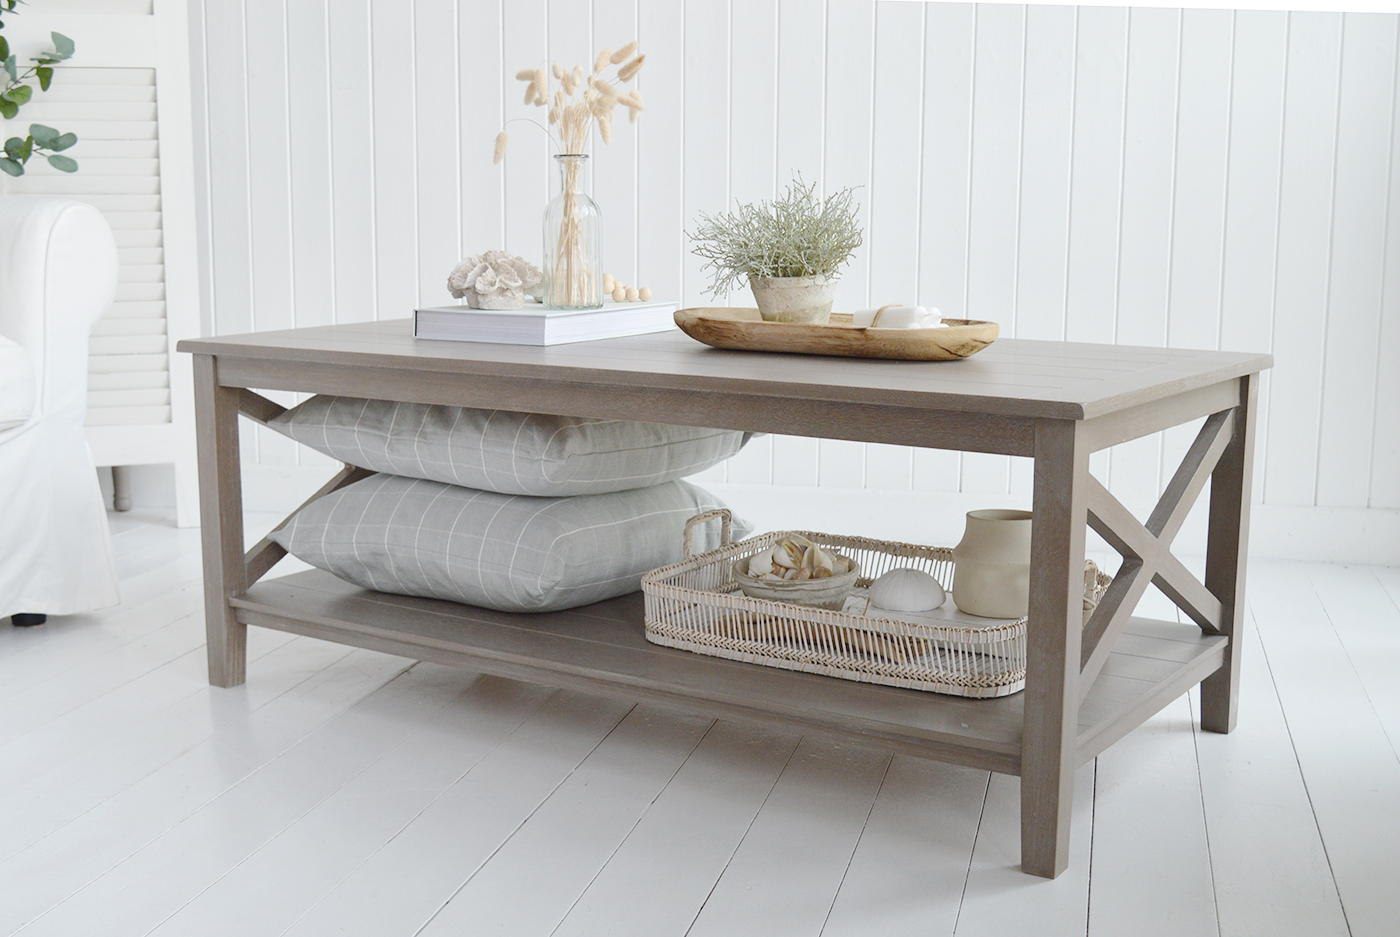 Cambridge Coffee Table - New England Interiors Furniture for Coastal, Modern Farmhouse and Country Homes